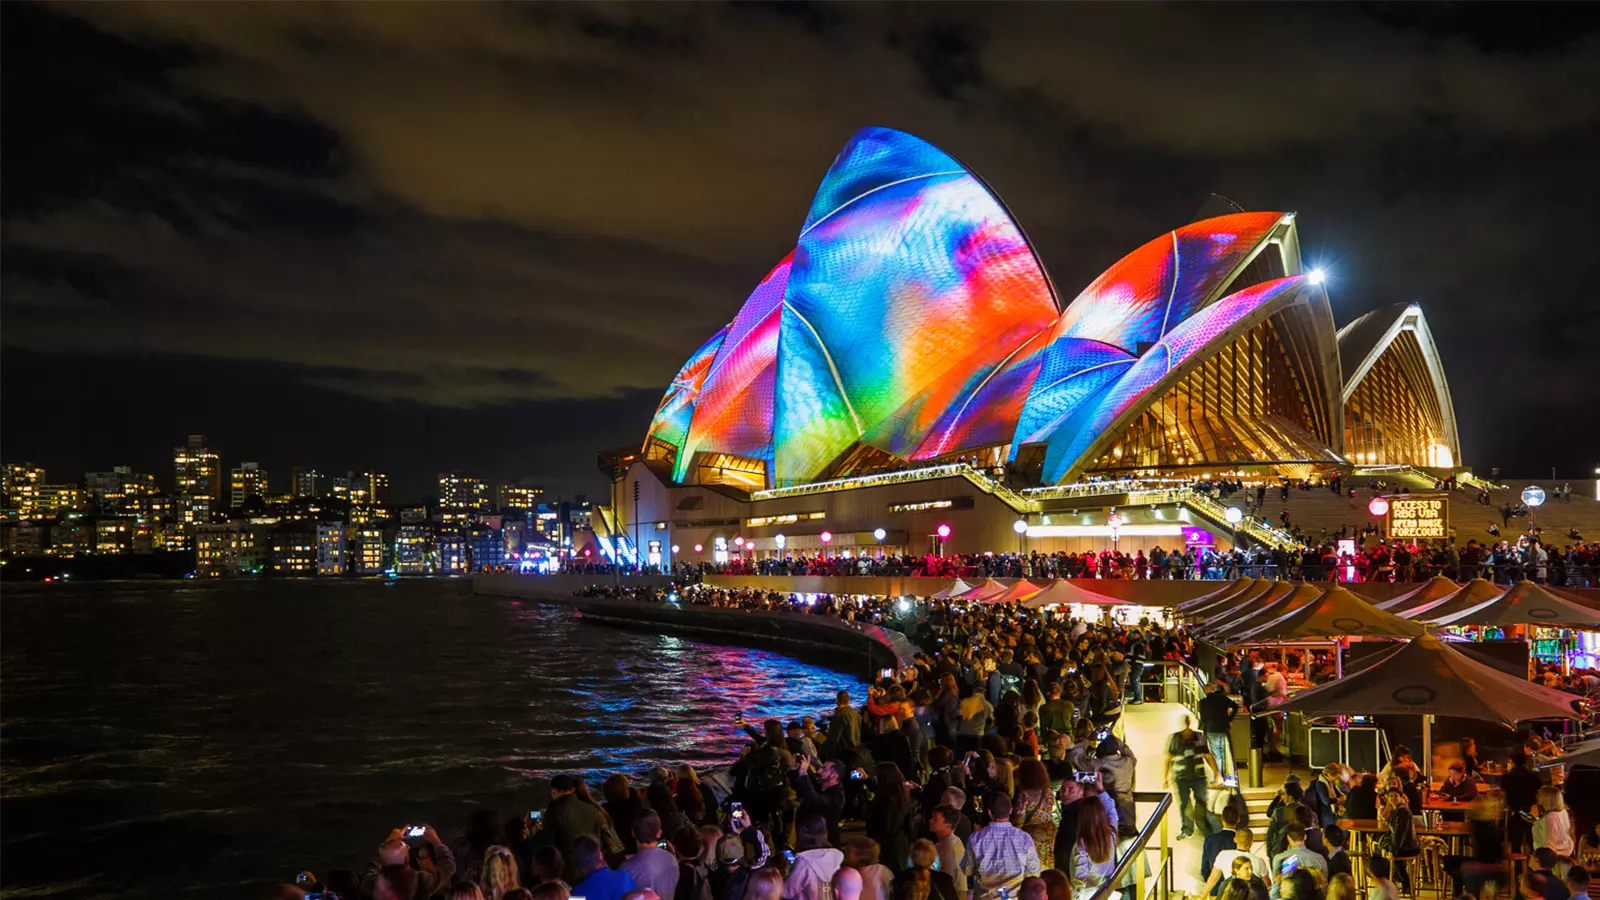 The Sydney Opera House lit up with colourful lights.